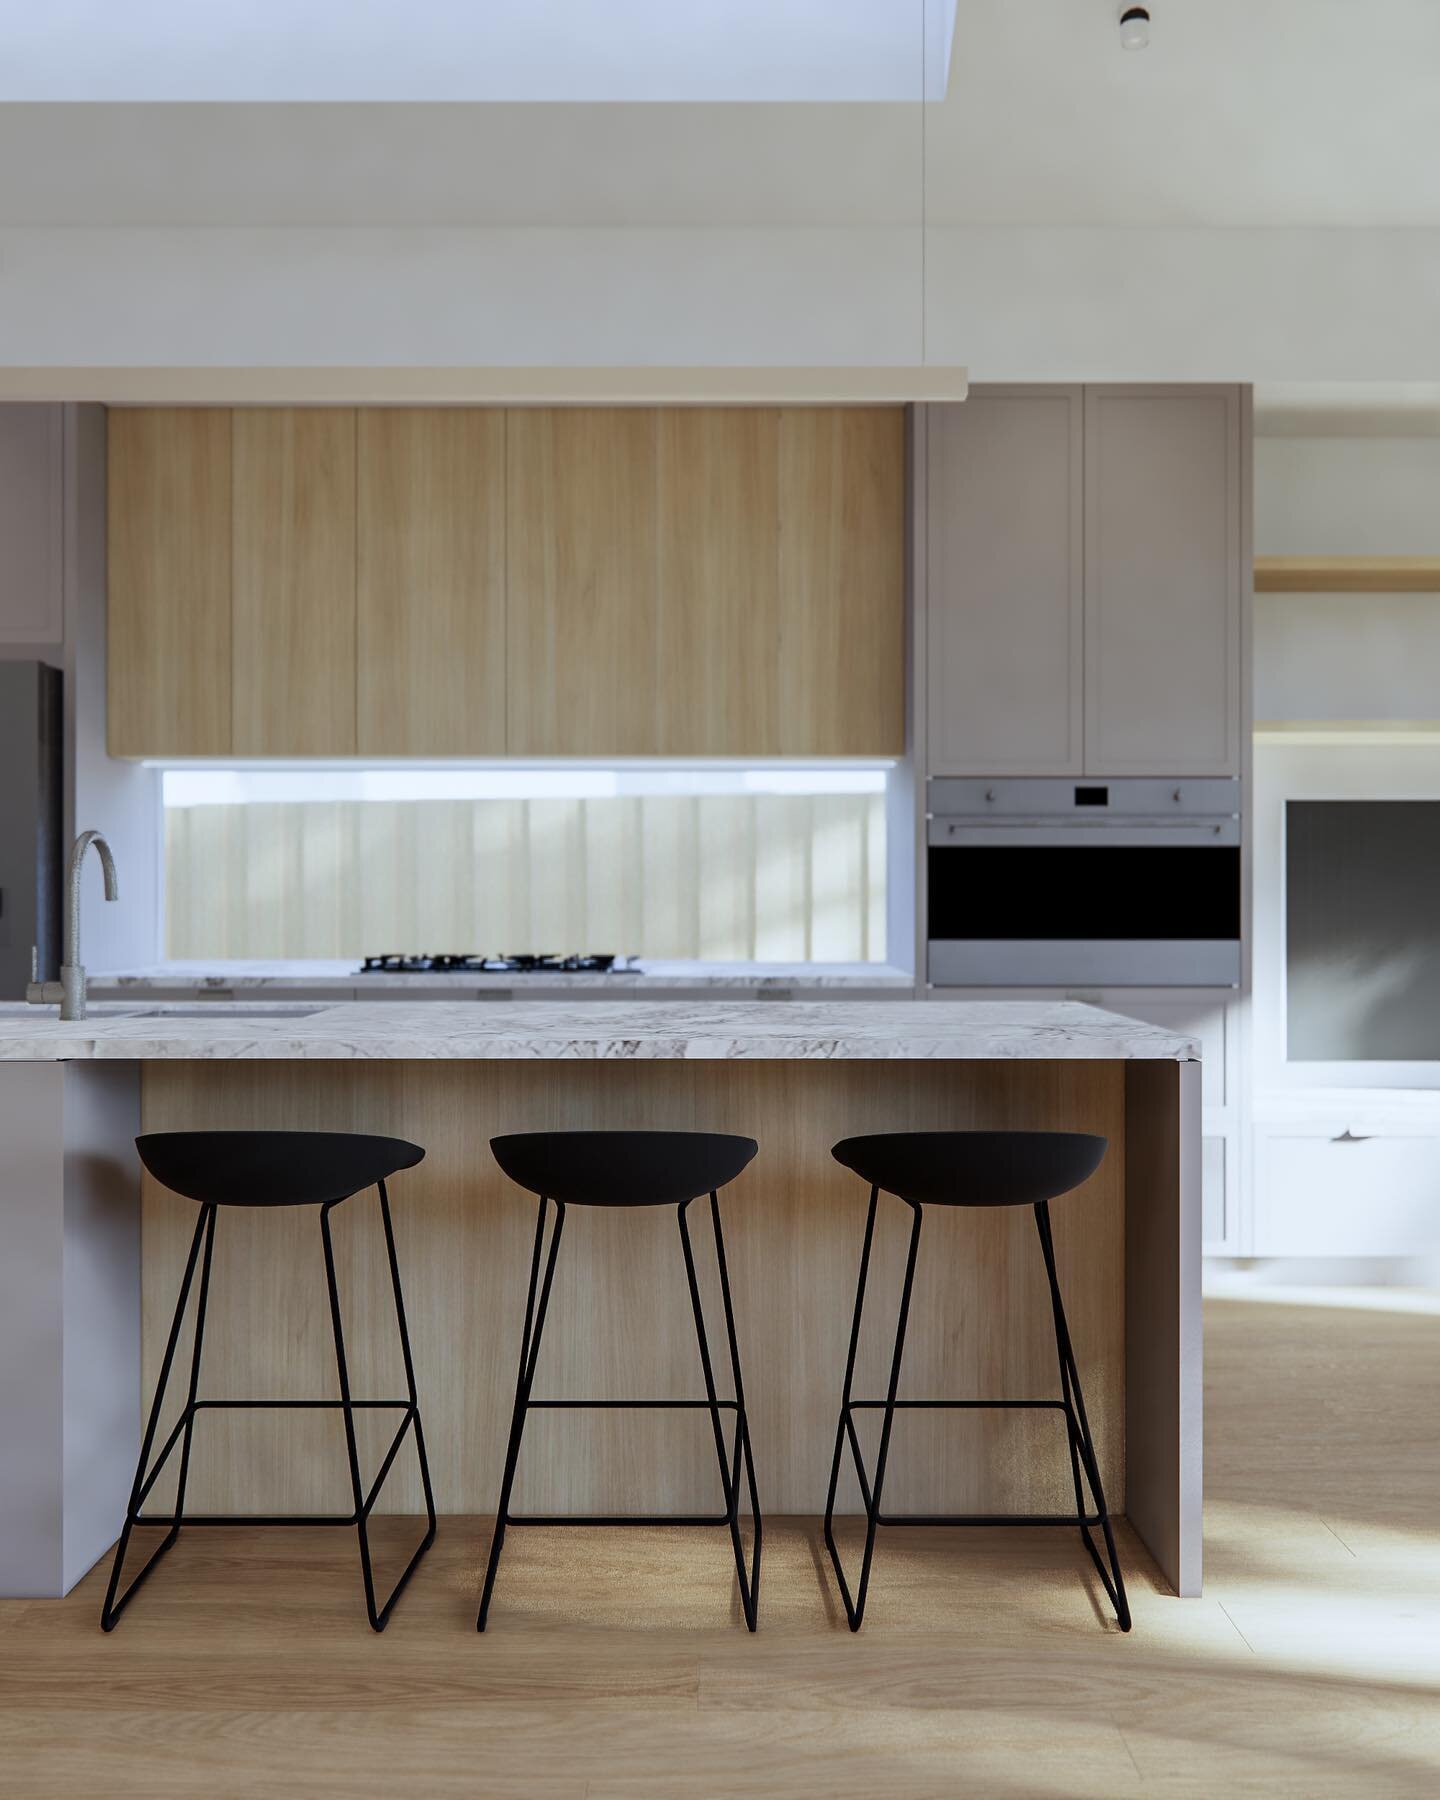 Our Wanalta project is currently under design development, the initial kitchen design is looking great. The timeless combination of cool grey and oak provides a solid basis for furnishing and styling
.
.
.
.
.
#basebuildingdesign #buildingdesign #arc